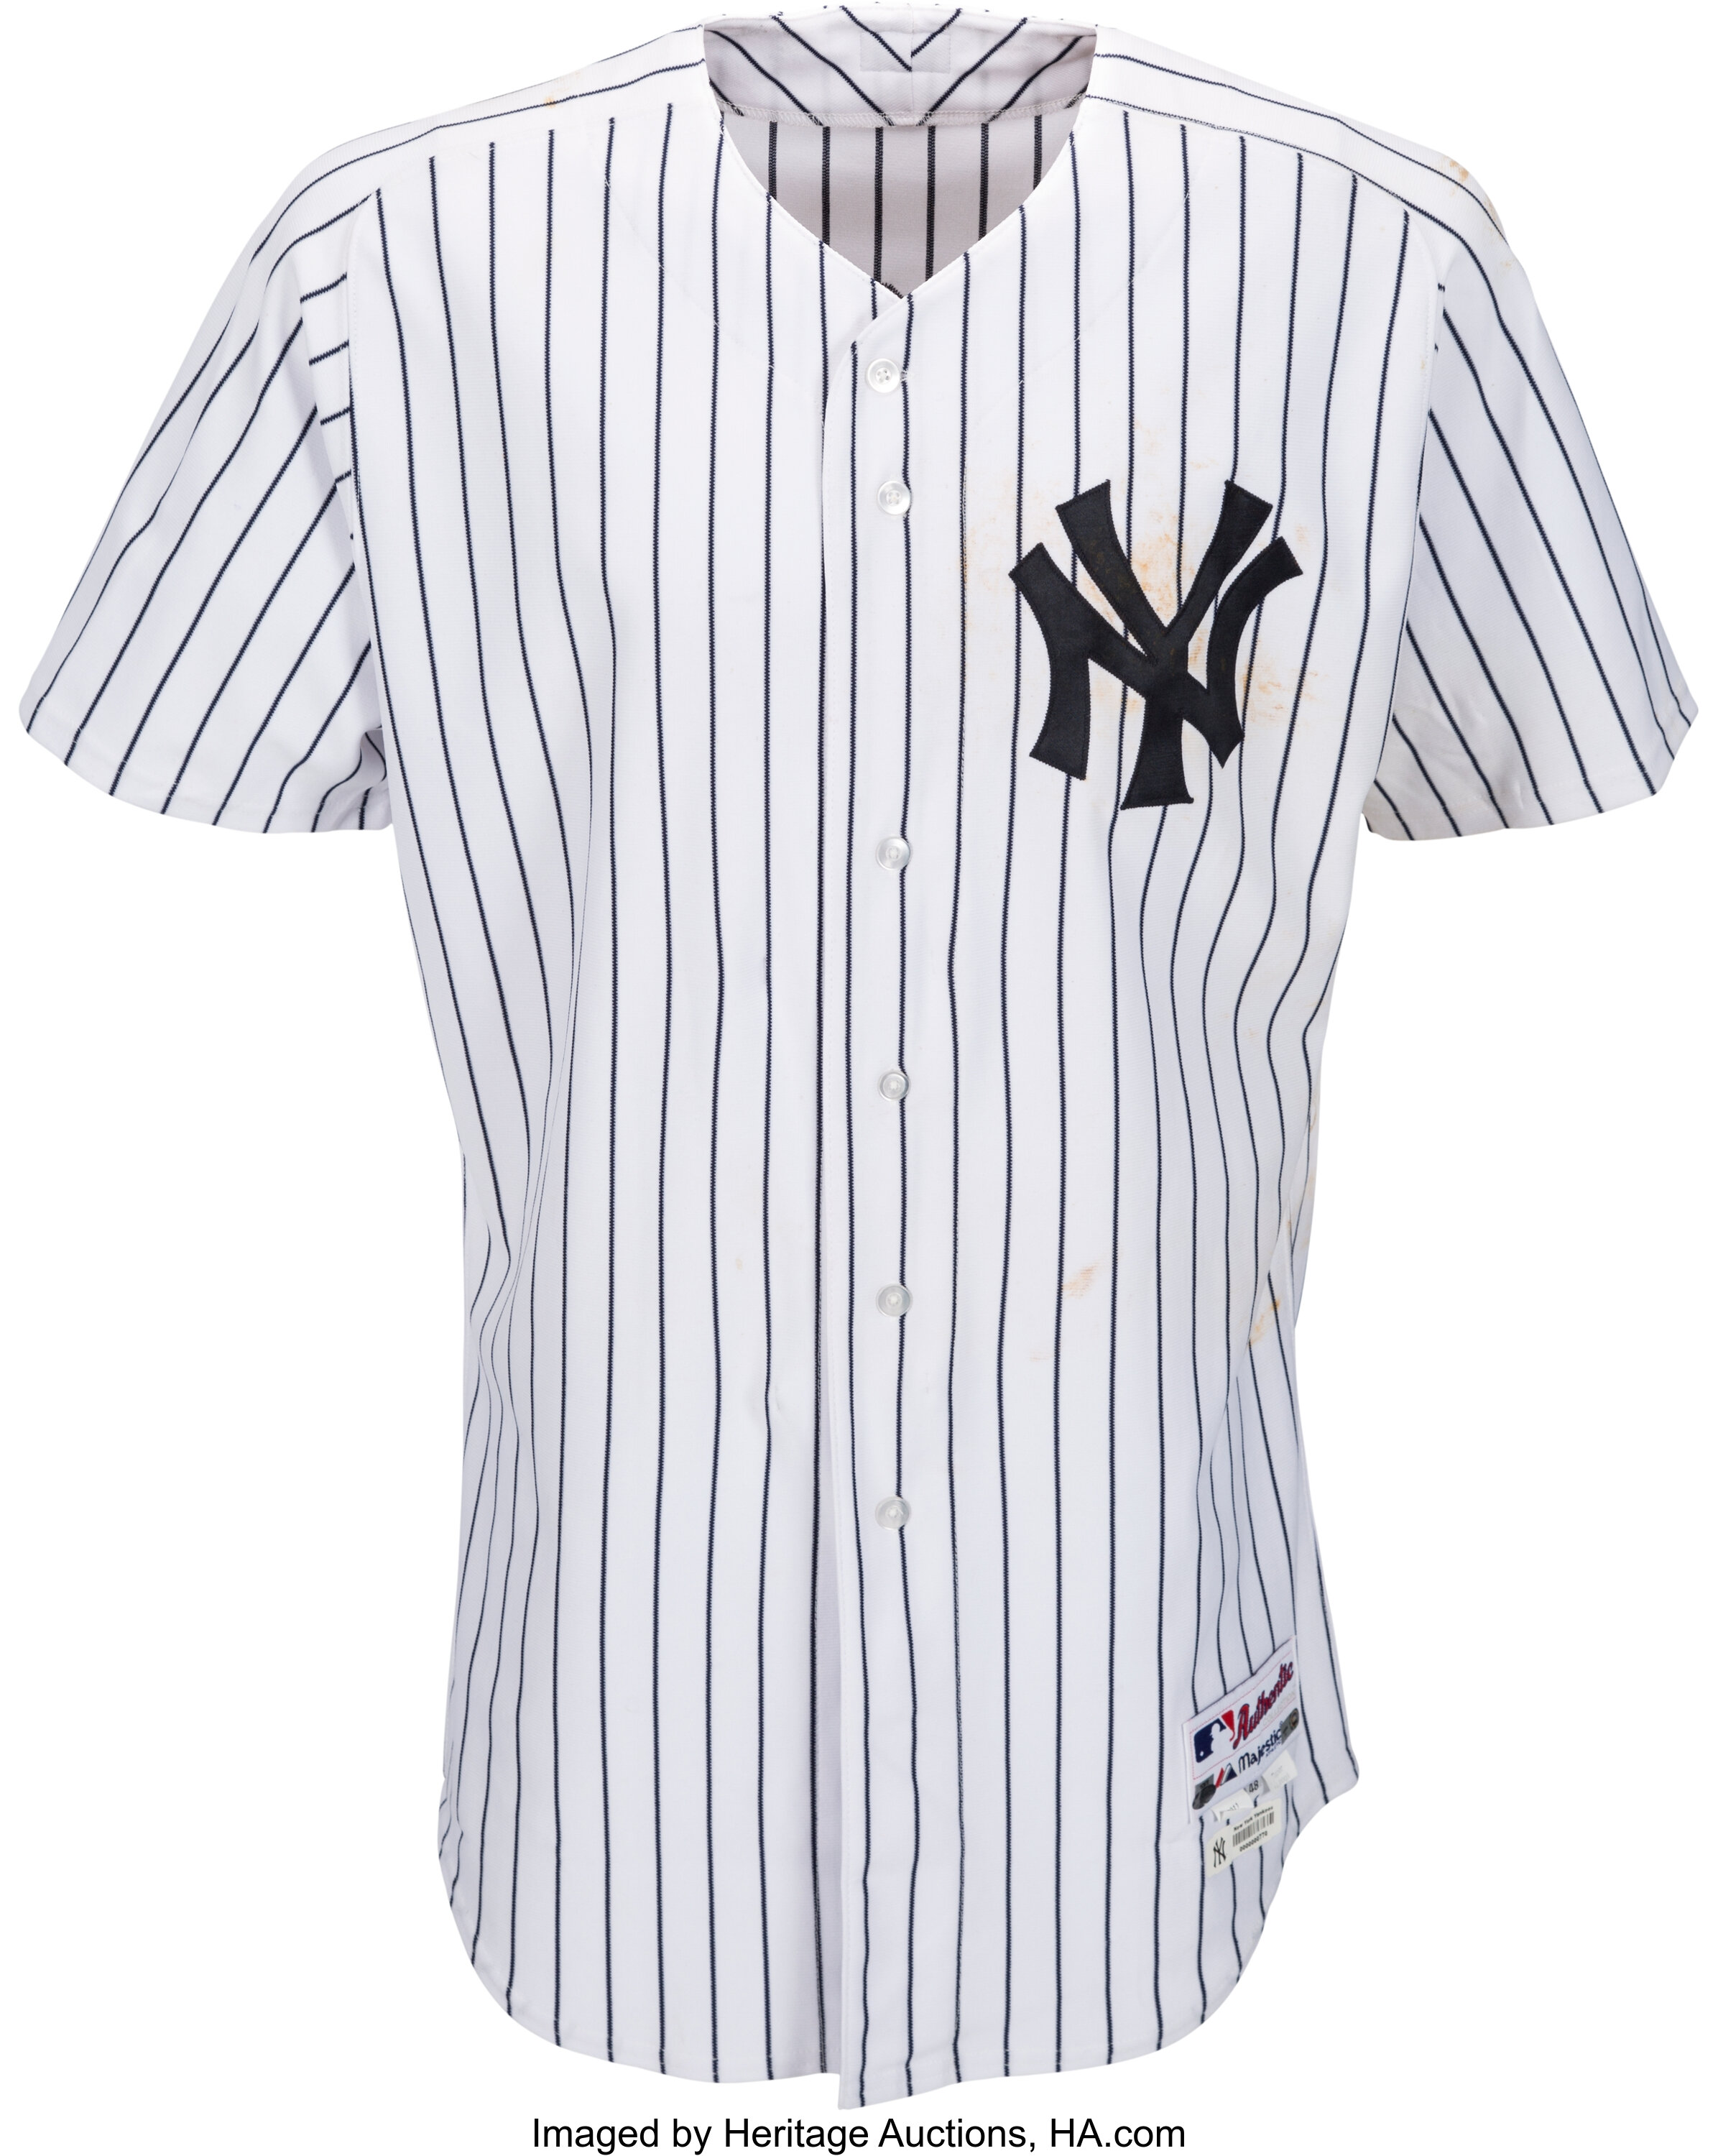 2011 Alex Rodriguez Game Worn Unwashed New York Yankees Jersey from, Lot  #81977